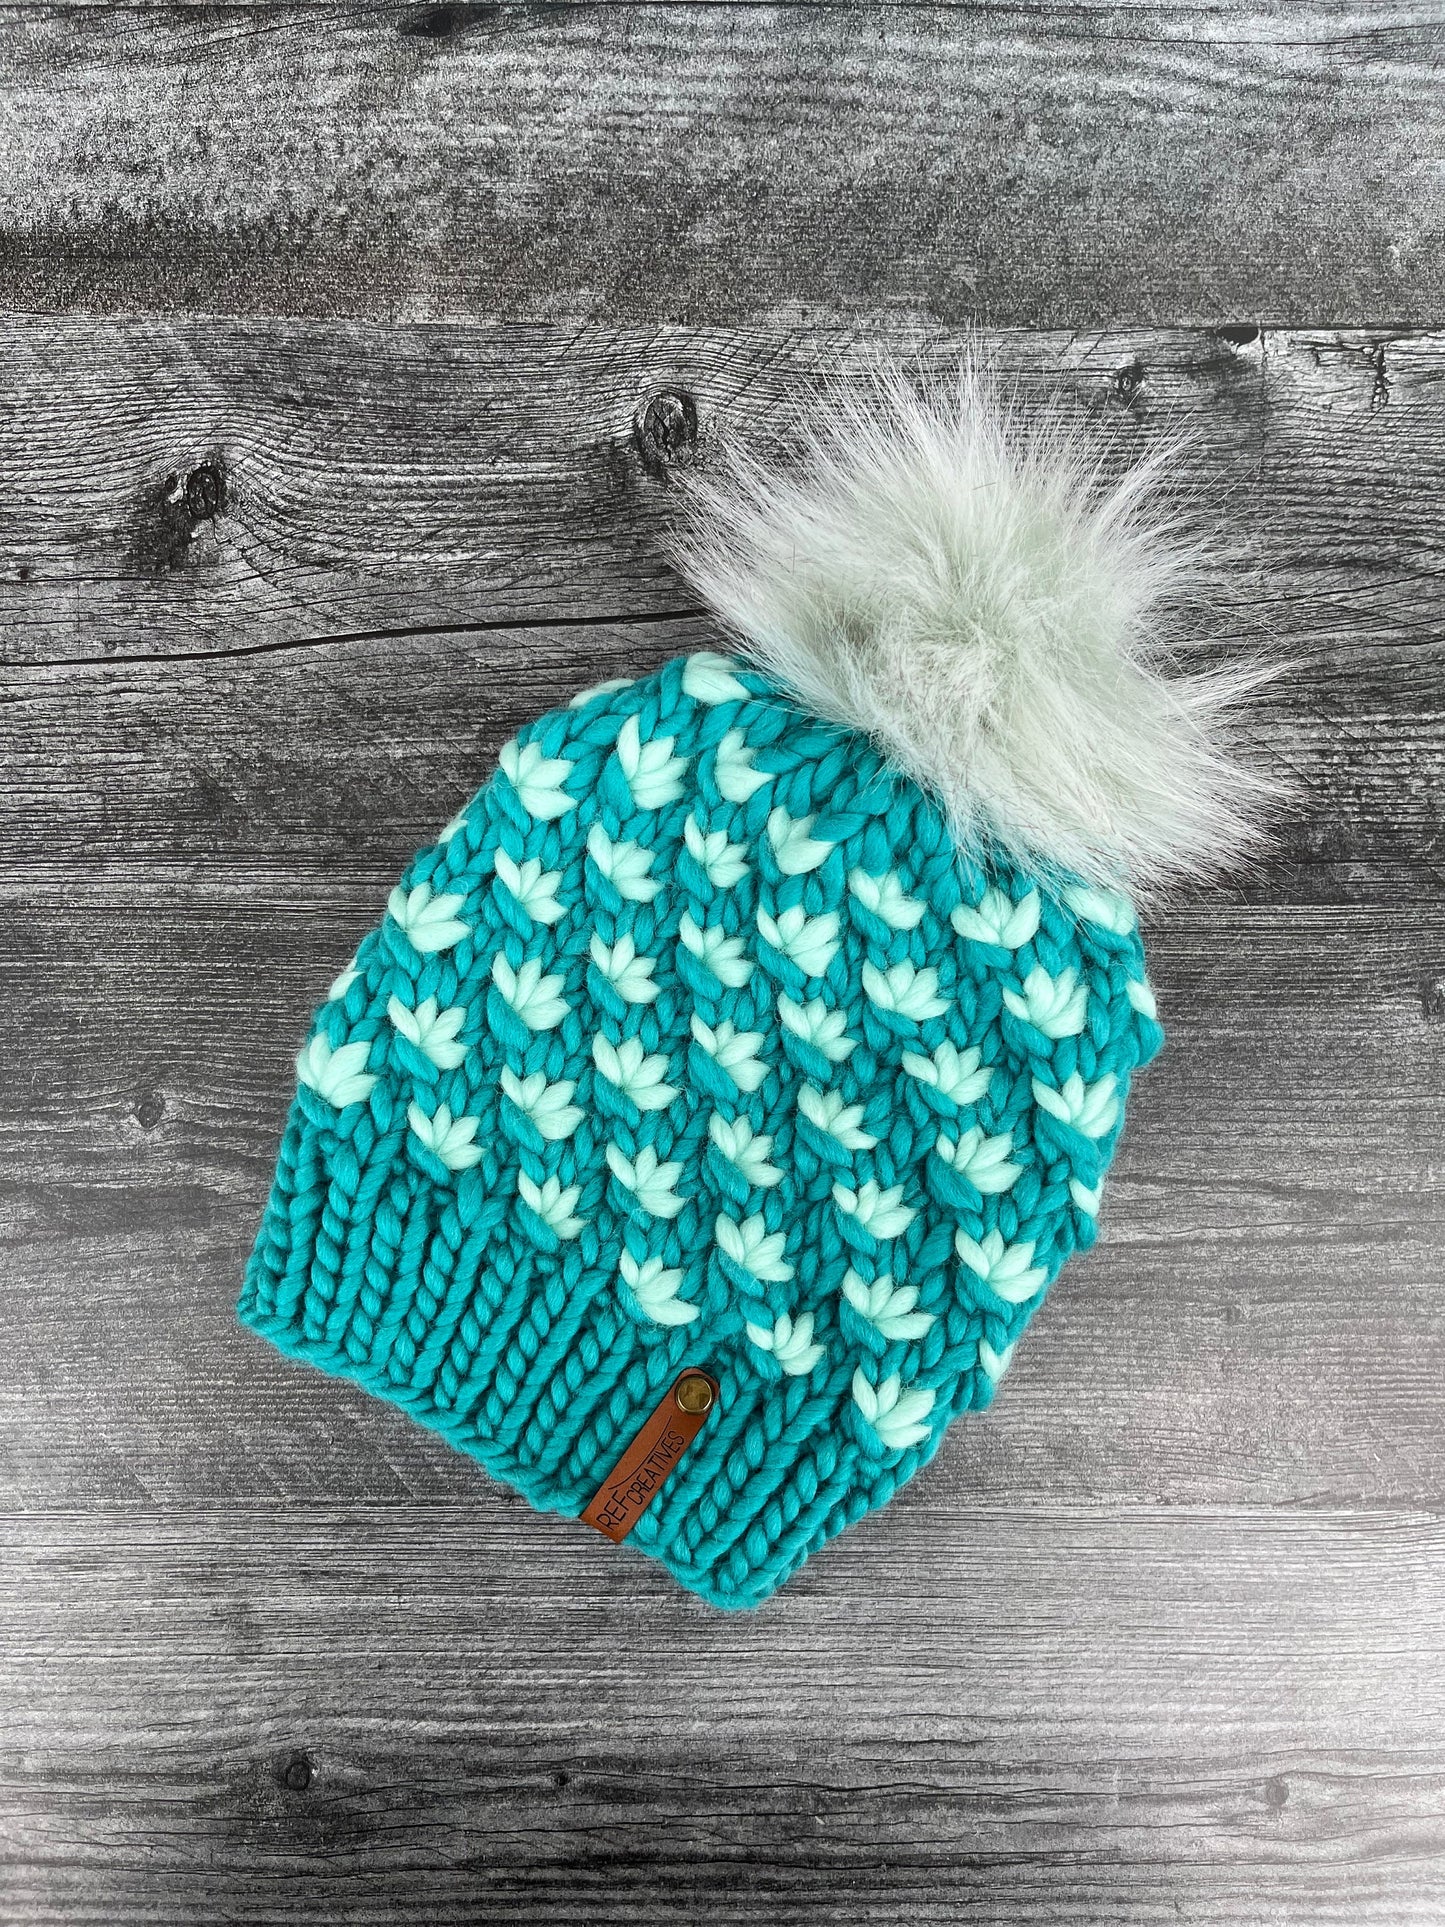 Luxury Teal Merino Wool Knit Hat - Teal and Mint Lotus Flower Beanie Hand Knit Hat with Hand Dyed Yarn